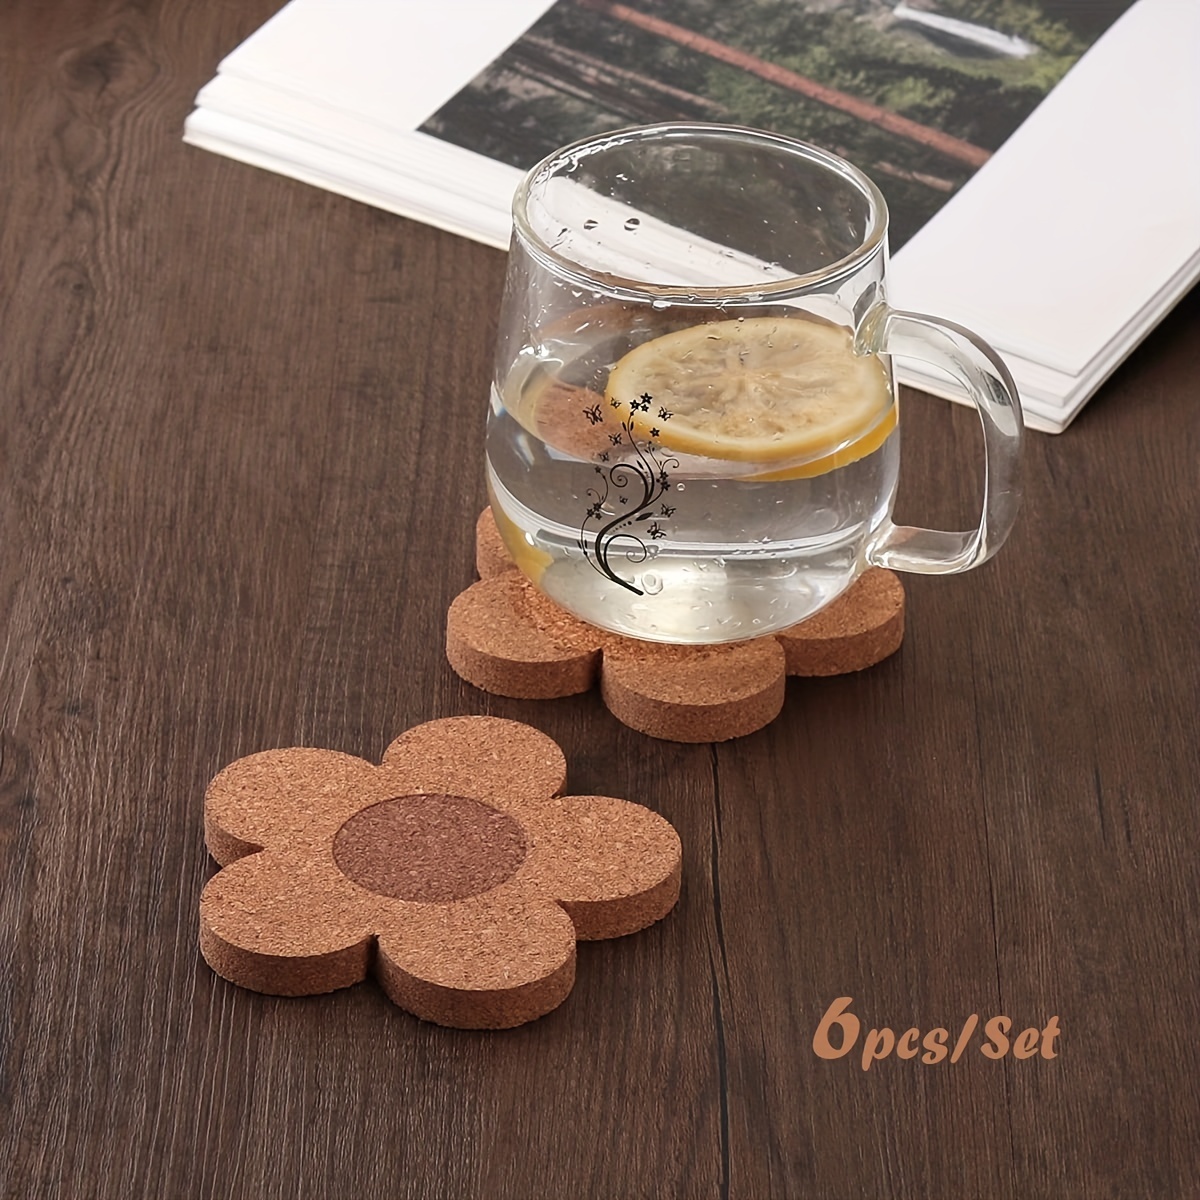 4pcs Flower-Shaped Thick Cork Coasters - Absorbent, Heat-Resistant &  Perfect for Drinks, Wine Glasses, Cups & Mugs for restaurants/cafes